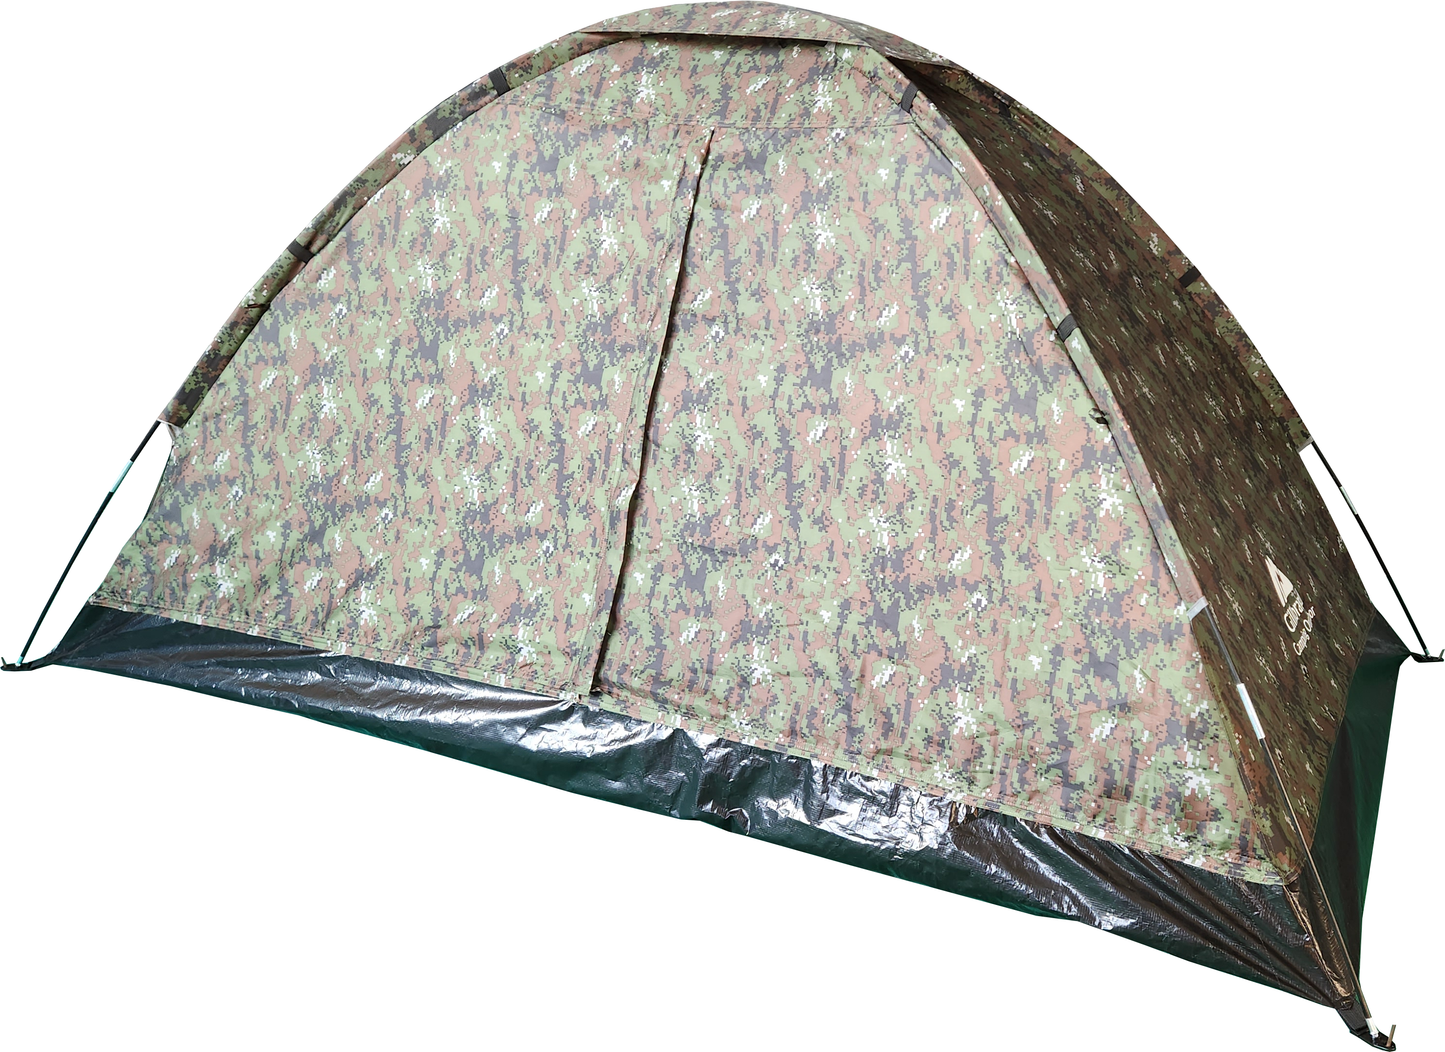 Chotto Outdoor - Gibson Camping Tent - Digital camouflage, autumn colors